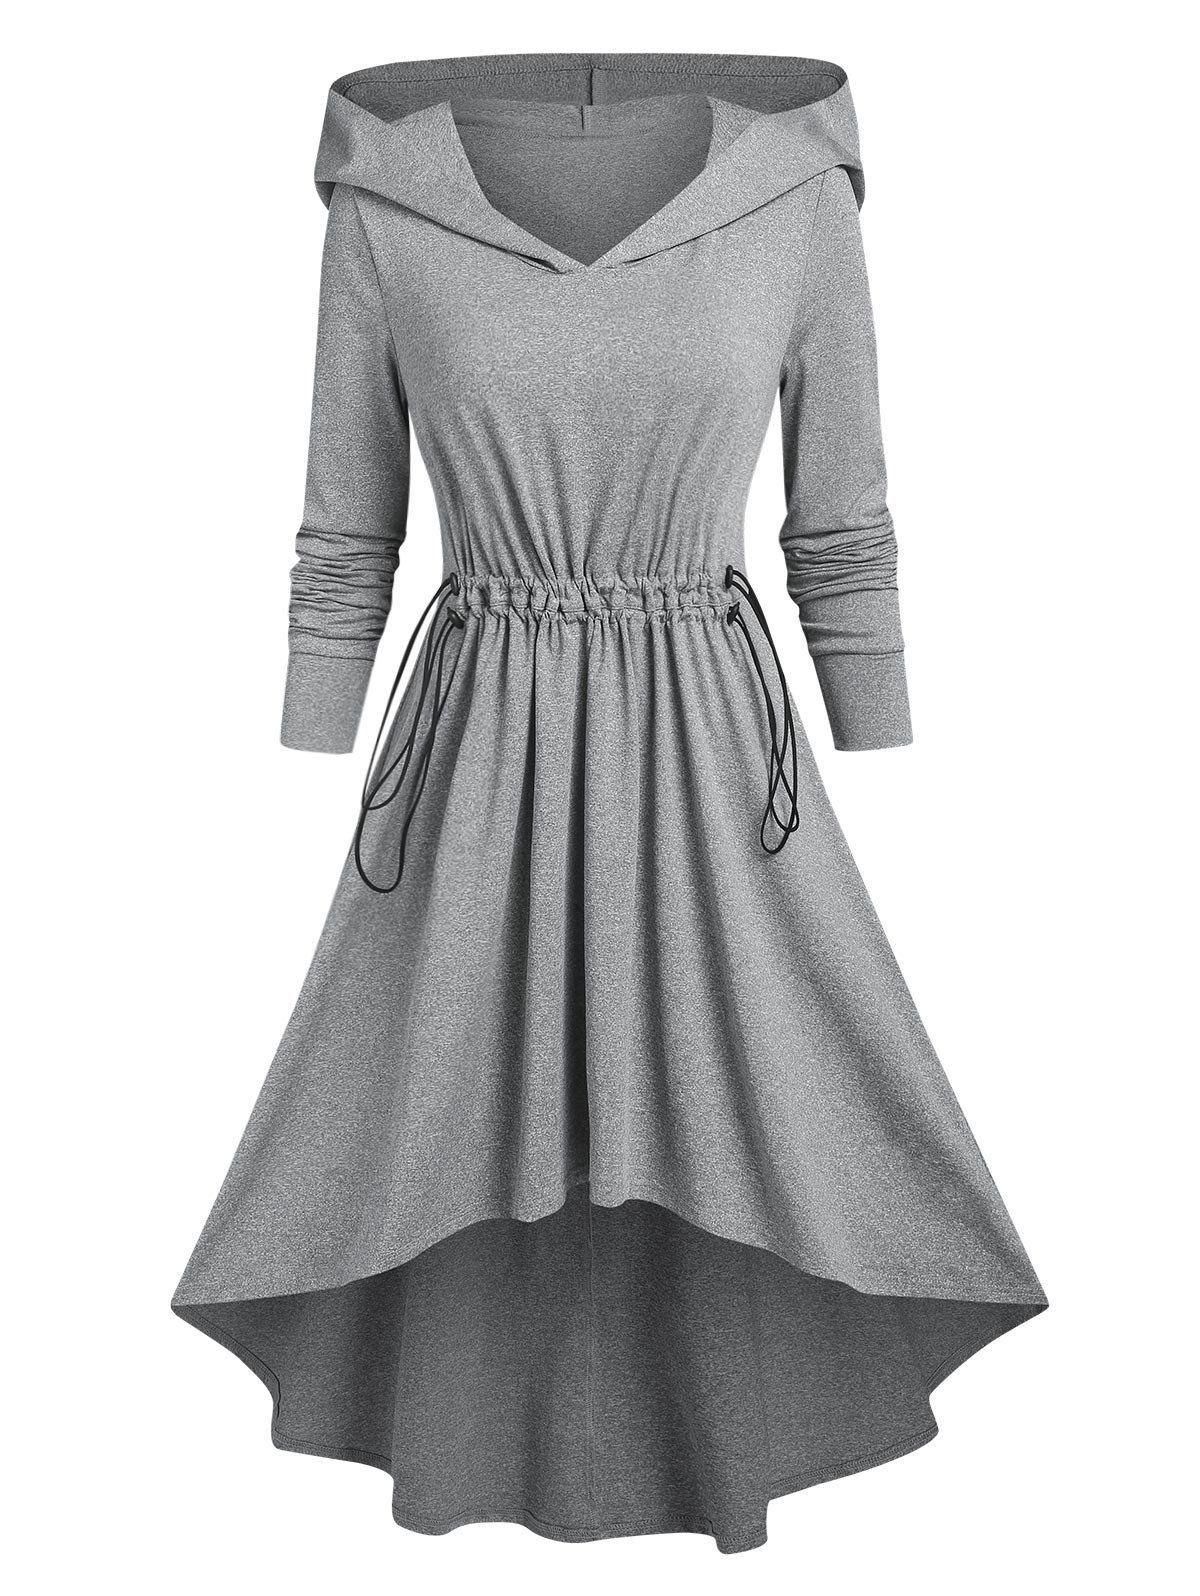 Hooded High-low Marled Dress - LIGHT GRAY M